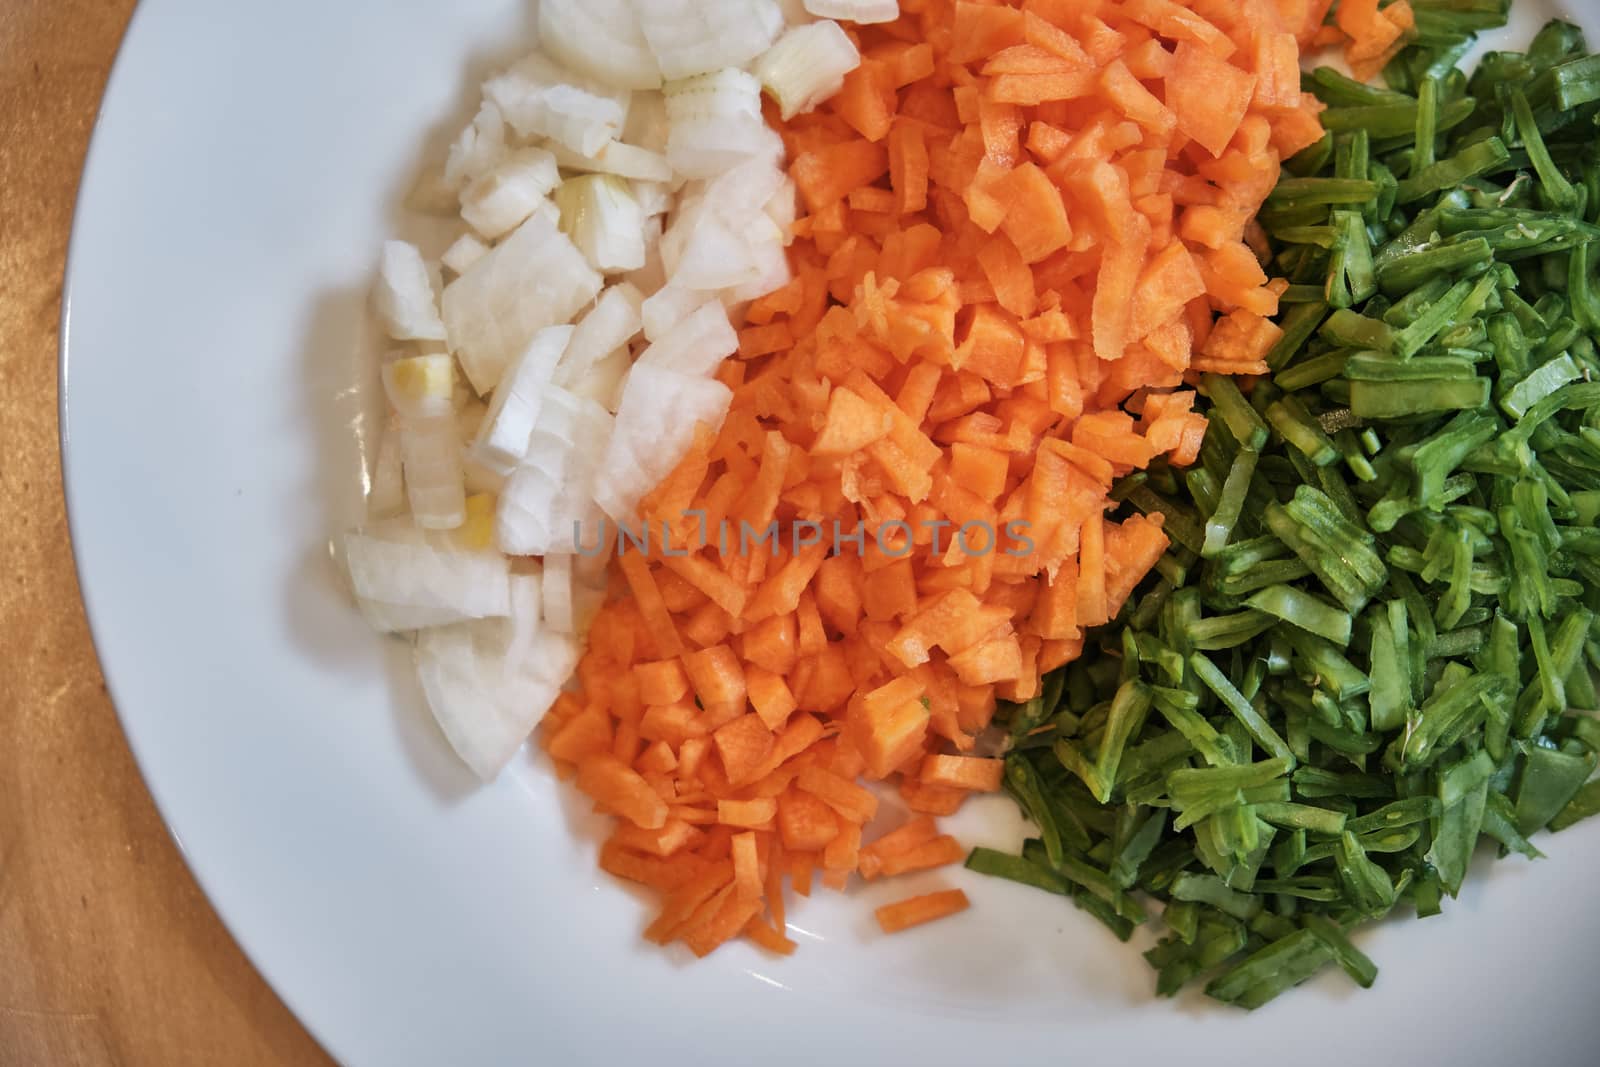 A plate of chopped onions, carrots and beans on a table.